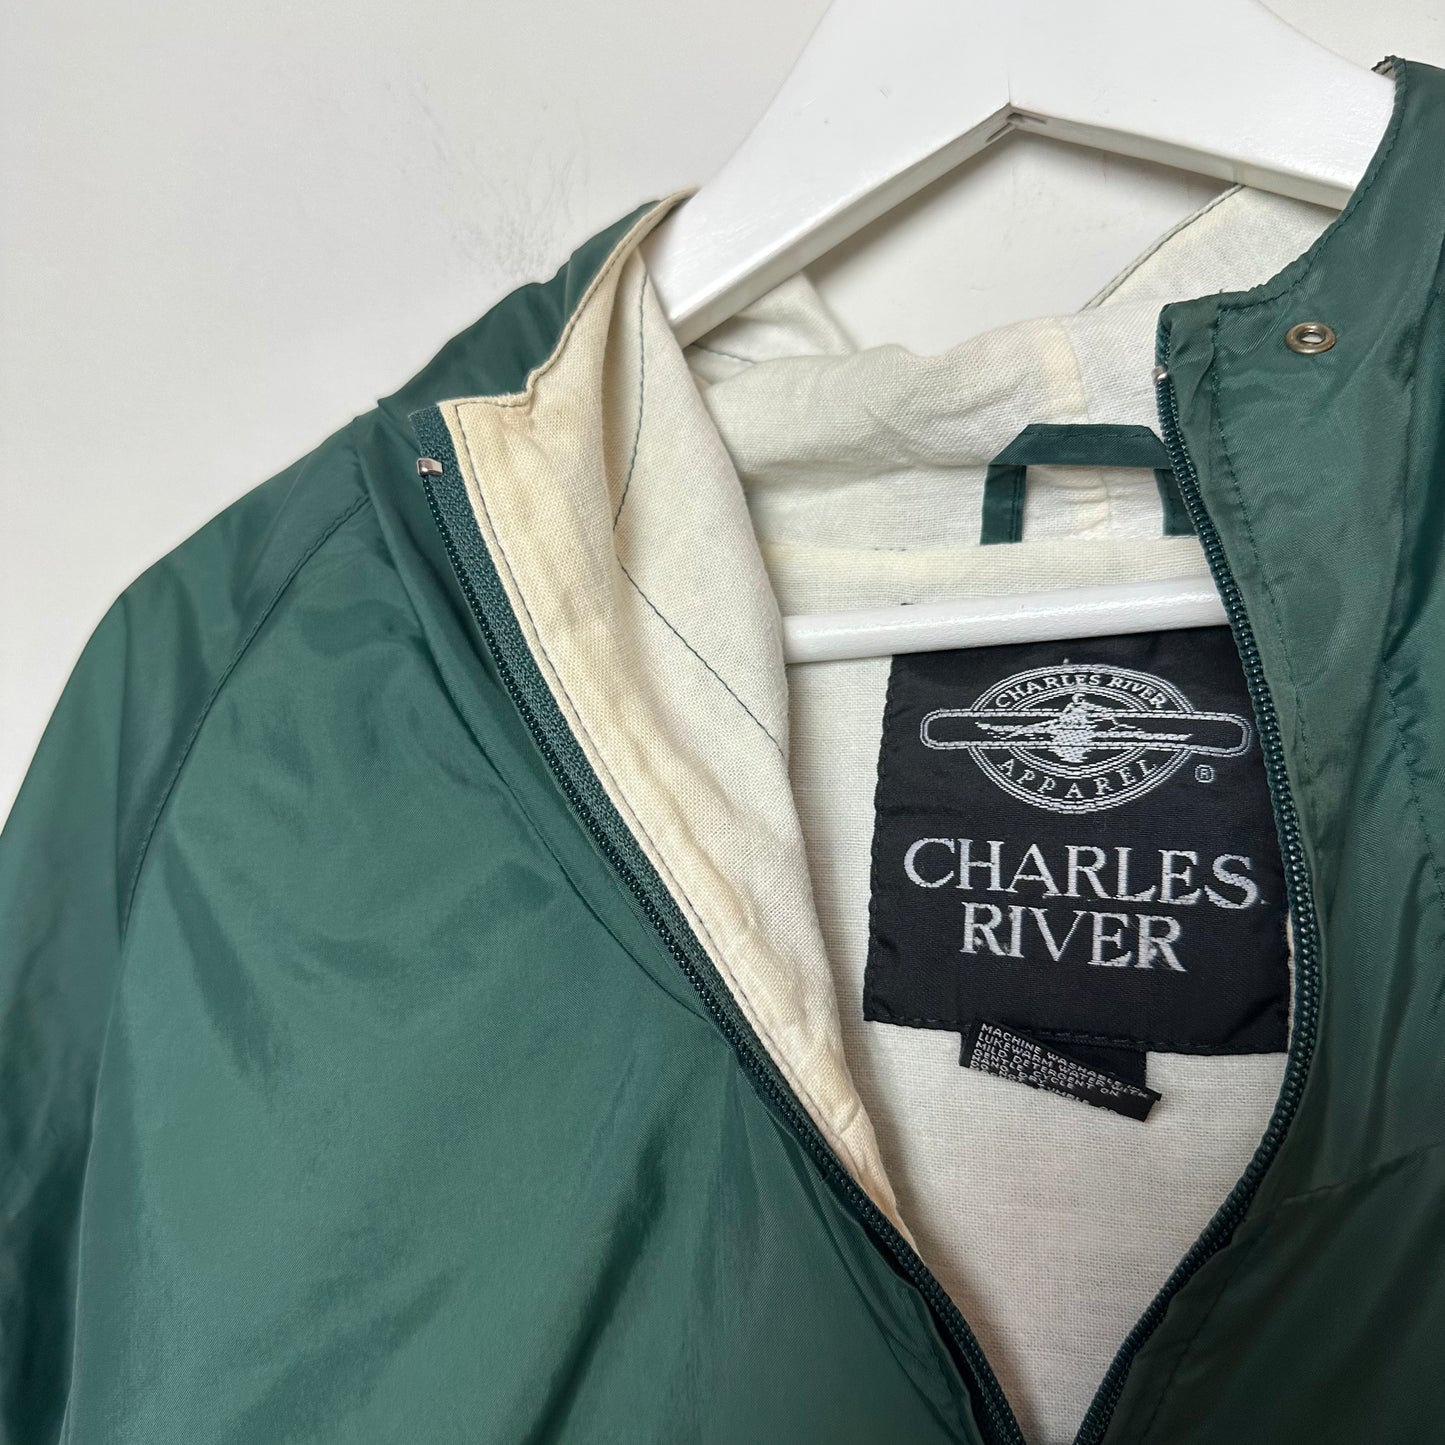 Charles River Ohio University Pullover Windbreaker Navy Blue and Green Color Block XL